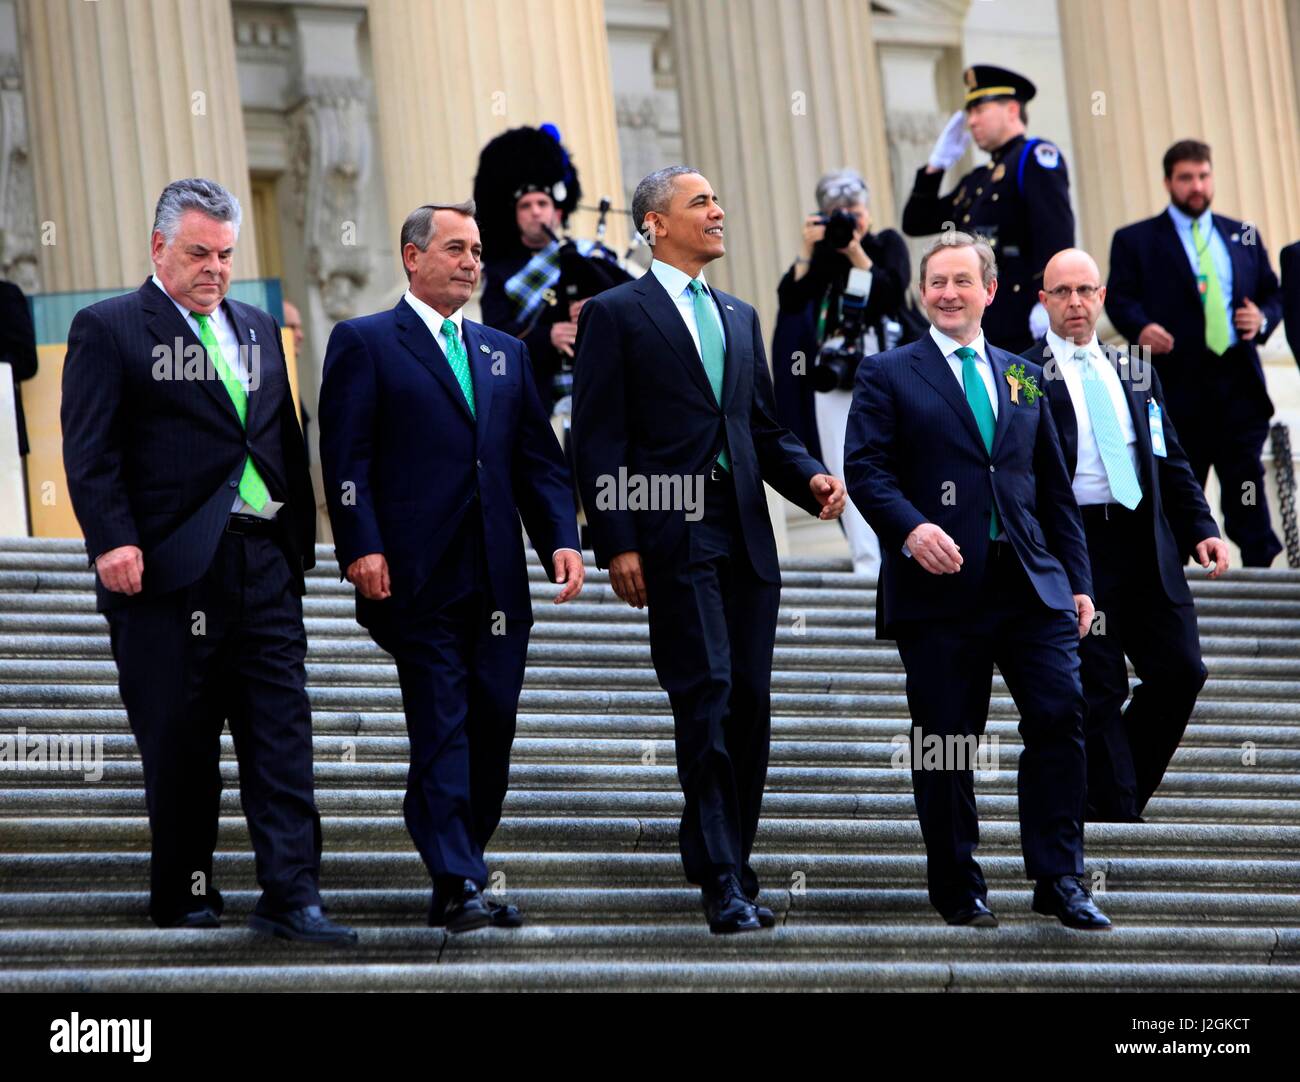 Representative Peter King, President Barack Obama, Speaker of the House John Boehner, and Irish Prime Minister Enda Kenny after a St. Patrick's Day lunch at the United States Capitol, Washington DC Stock Photo